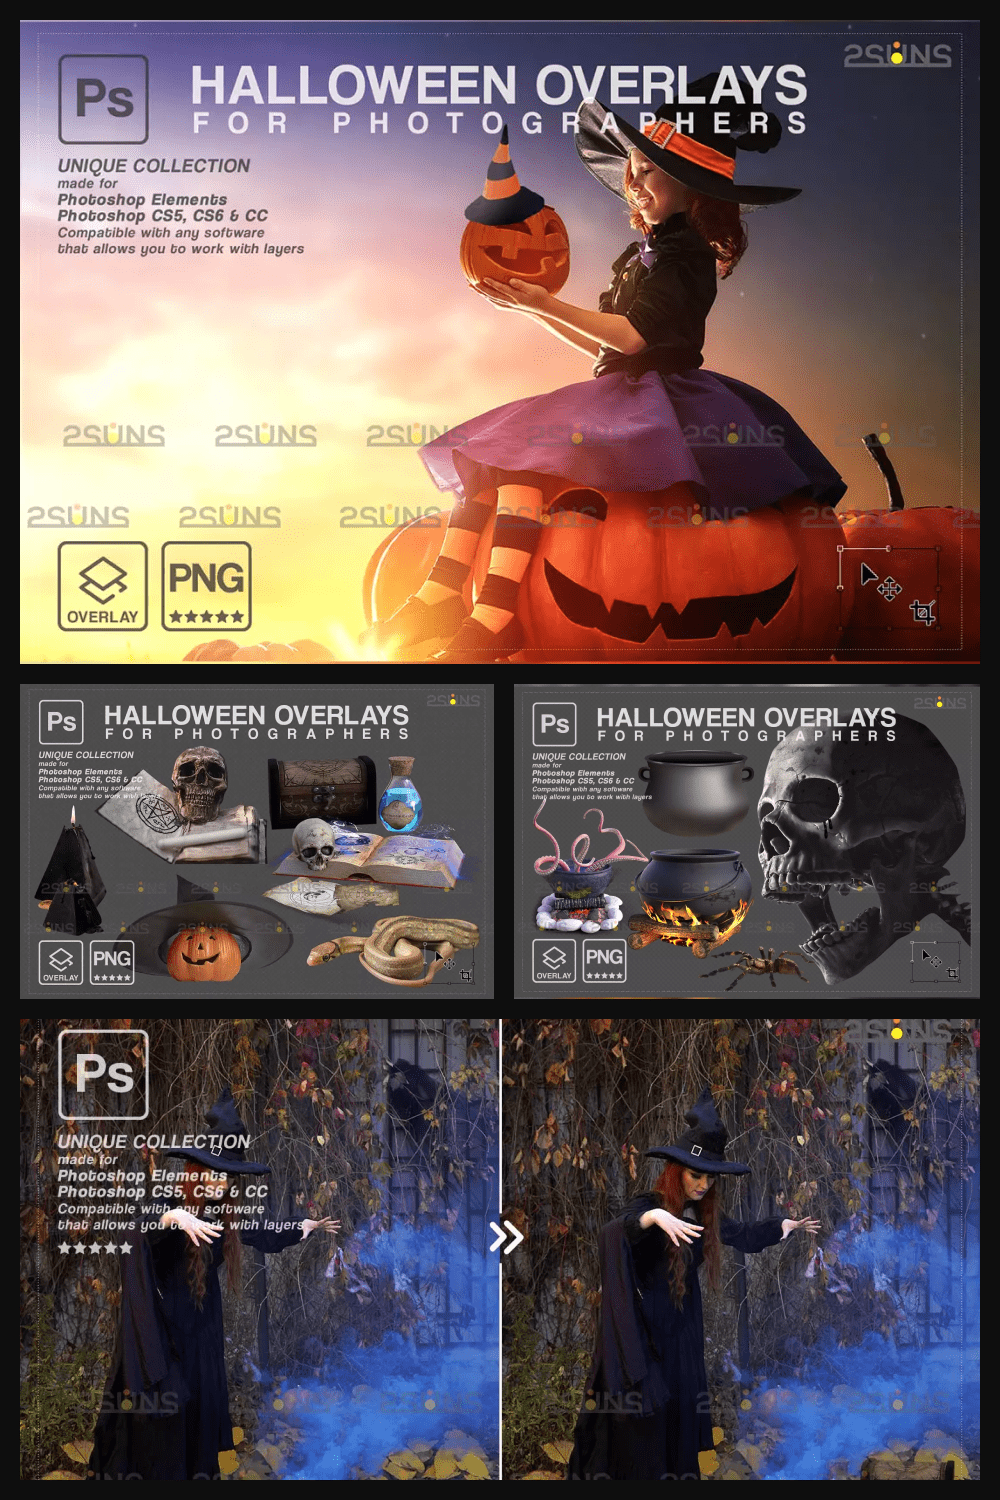 Collage of images on the theme of Halloween with a girl on a pumpkin.